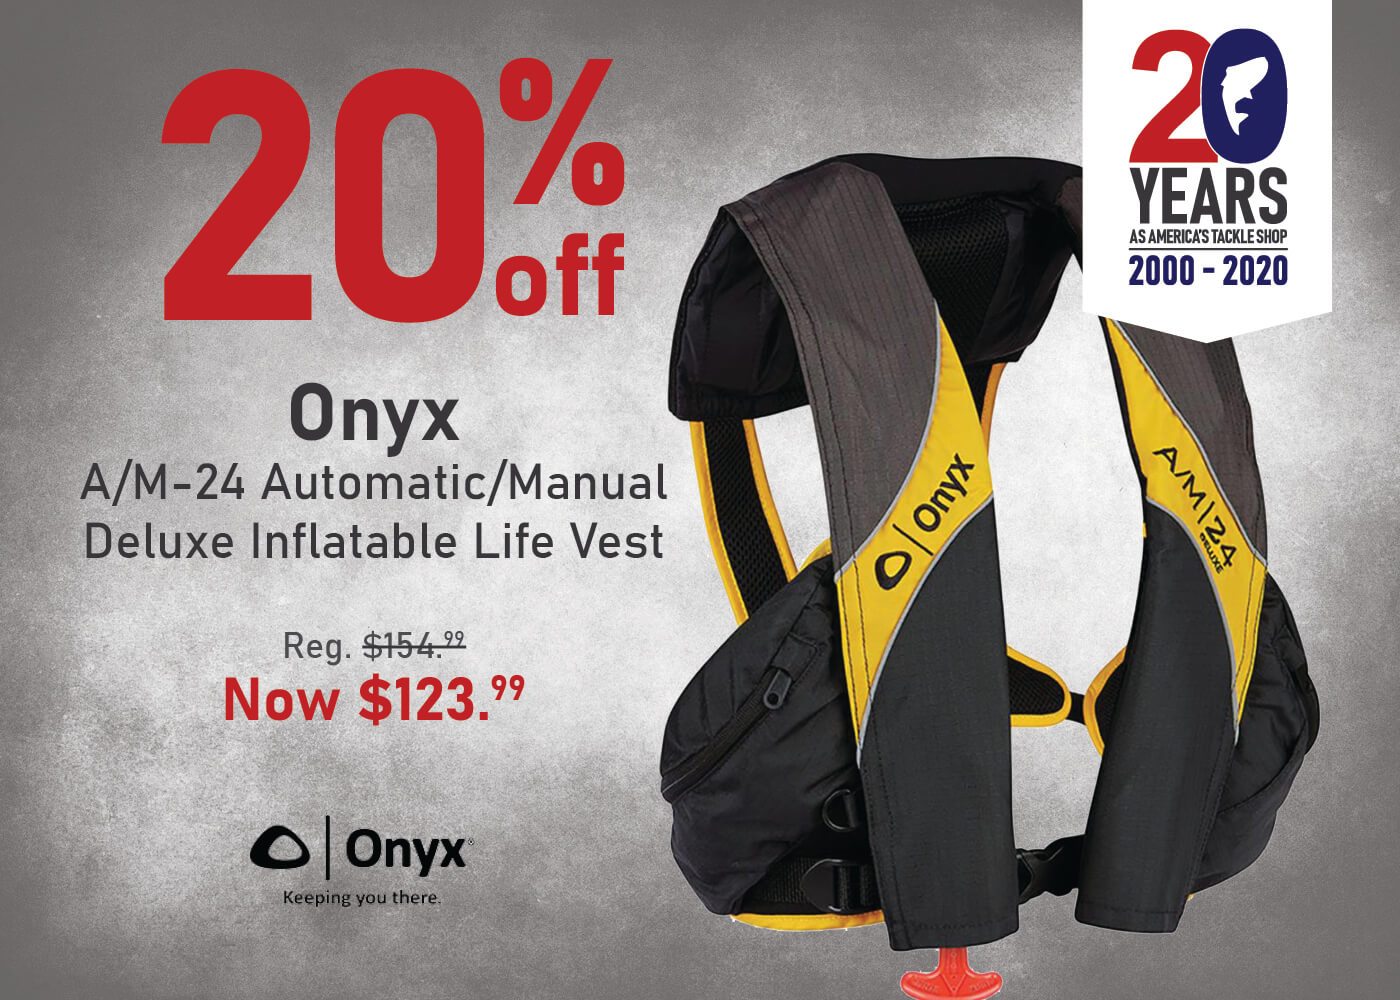 Save 20% on the Onyx A/M-24 Automatic/Manual Deluxe Inflatable Life Vest